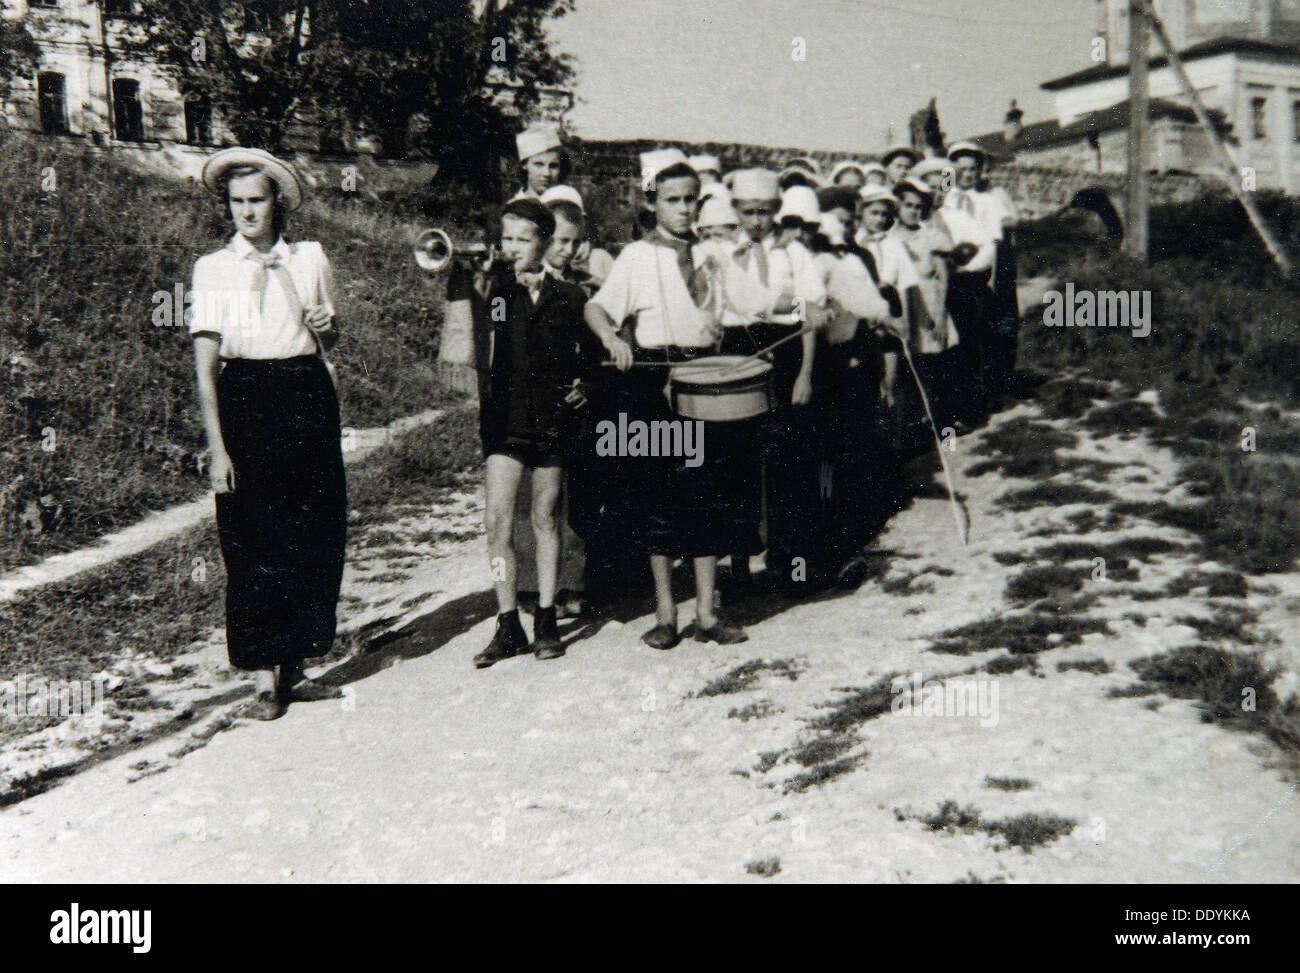 A Pioneers unit at All-Union Young Pioneer Camp Artek, Gurzuf, Crimea, USSR, 1930s(?). Artist: Unknown Stock Photo